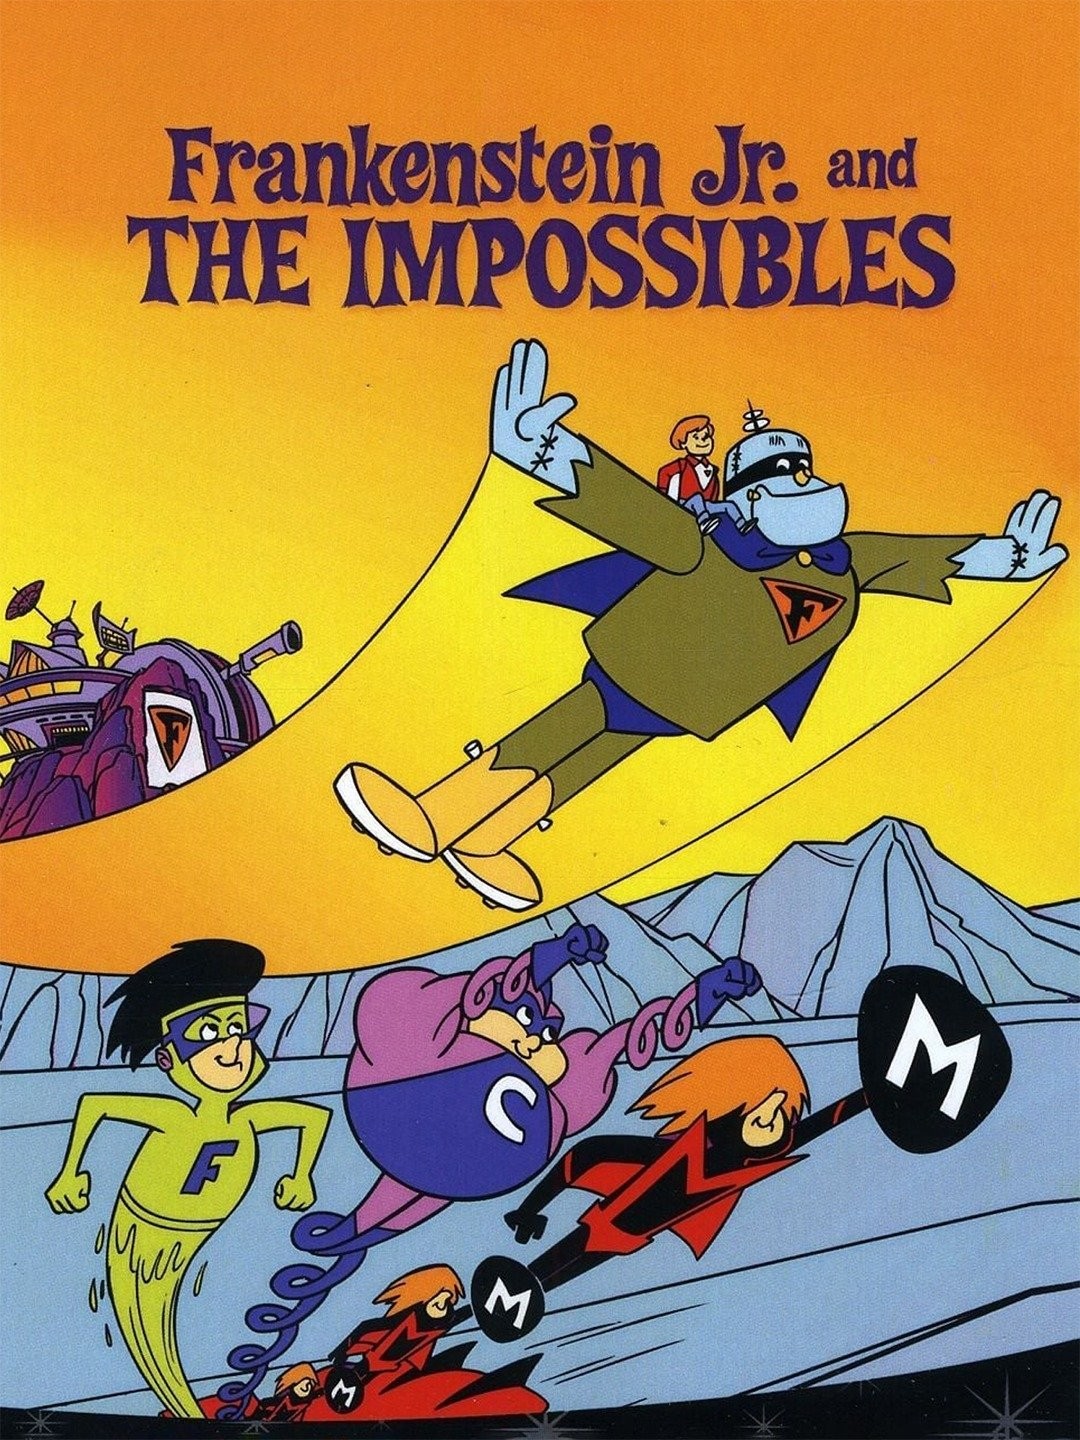 Frankenstein Jr.and THE IMPOSSIBLES